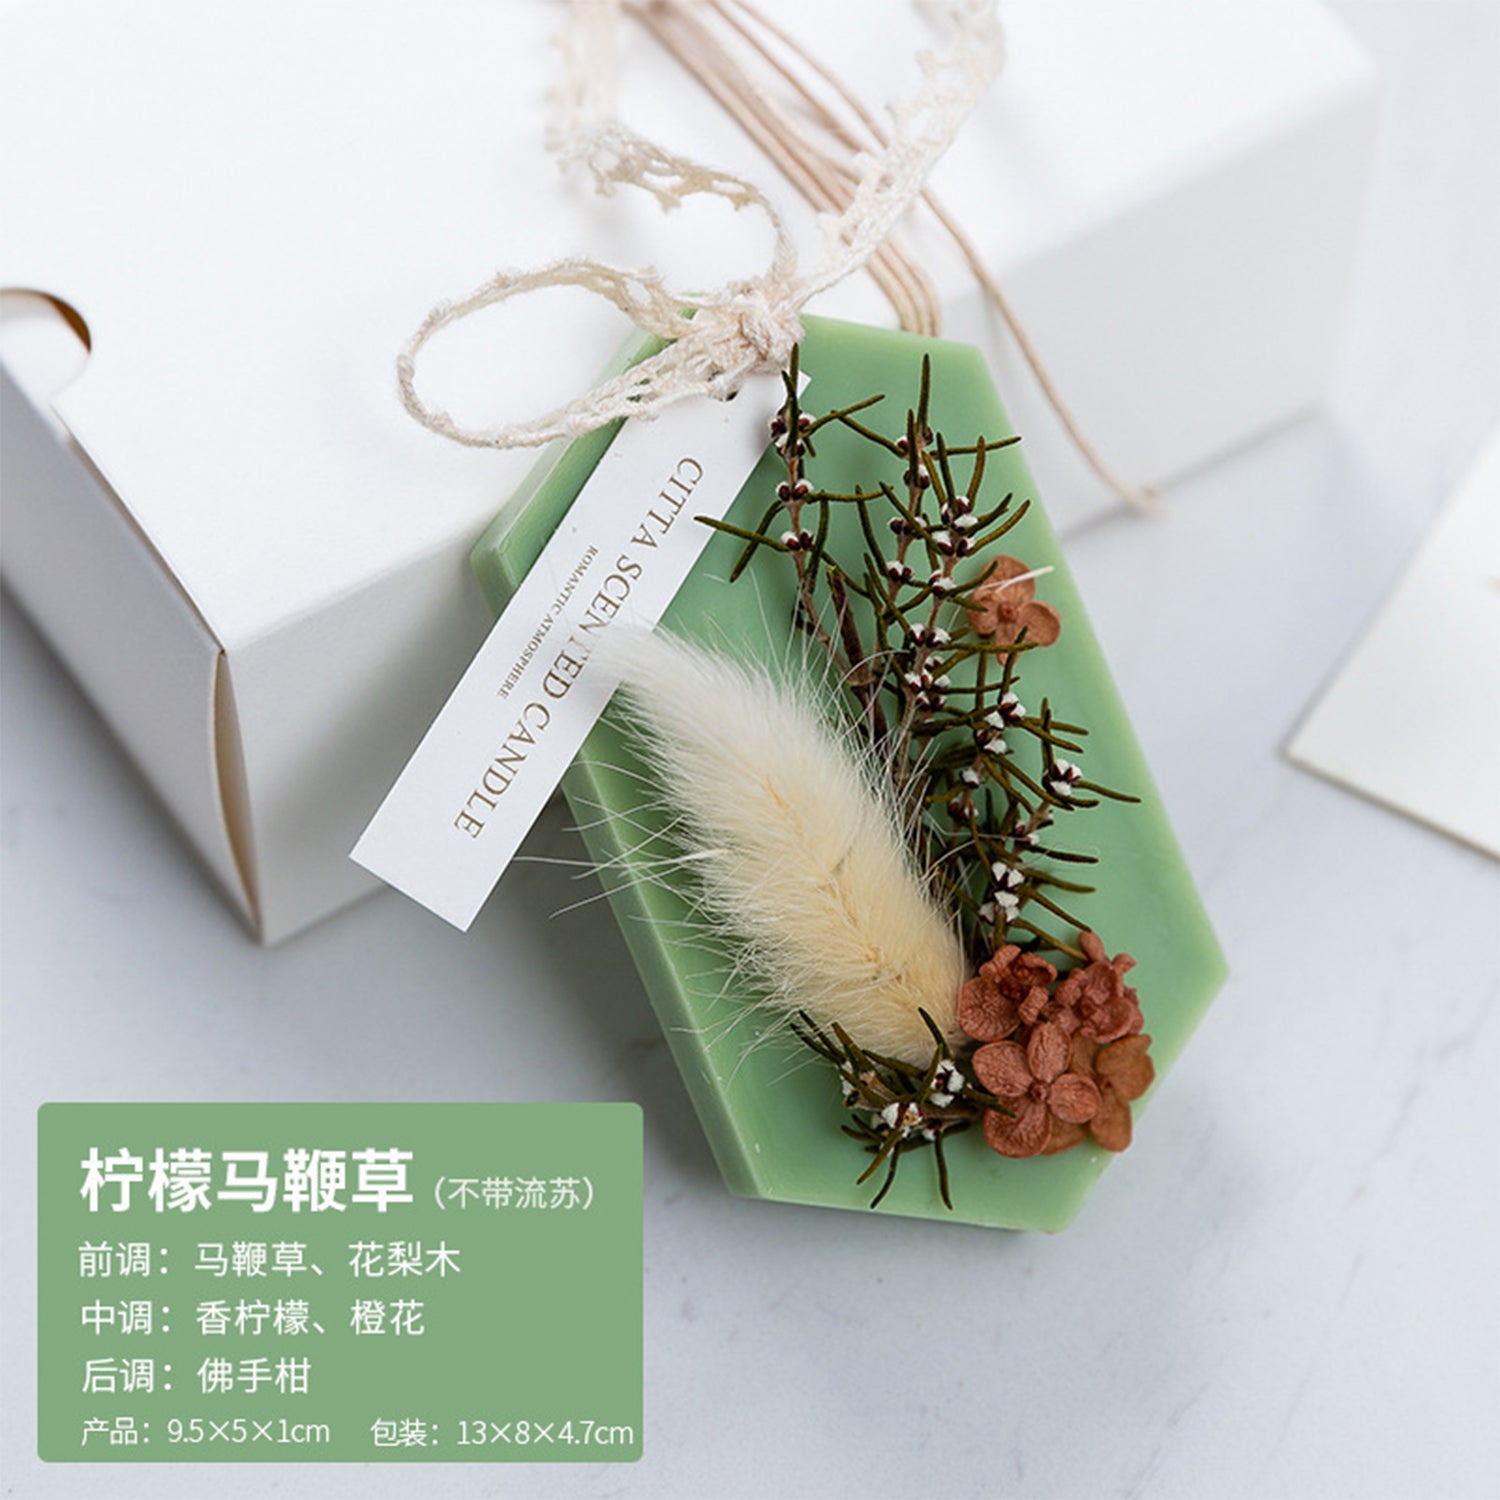 CITTA Dried Flower Scented Wax Slice Door Gift Aromatherapy Natural Smell Aroma Candle Natural Smell Wardrobe Perfume Fragrance Aromantic Closet Scent/ Sachet Fragrance